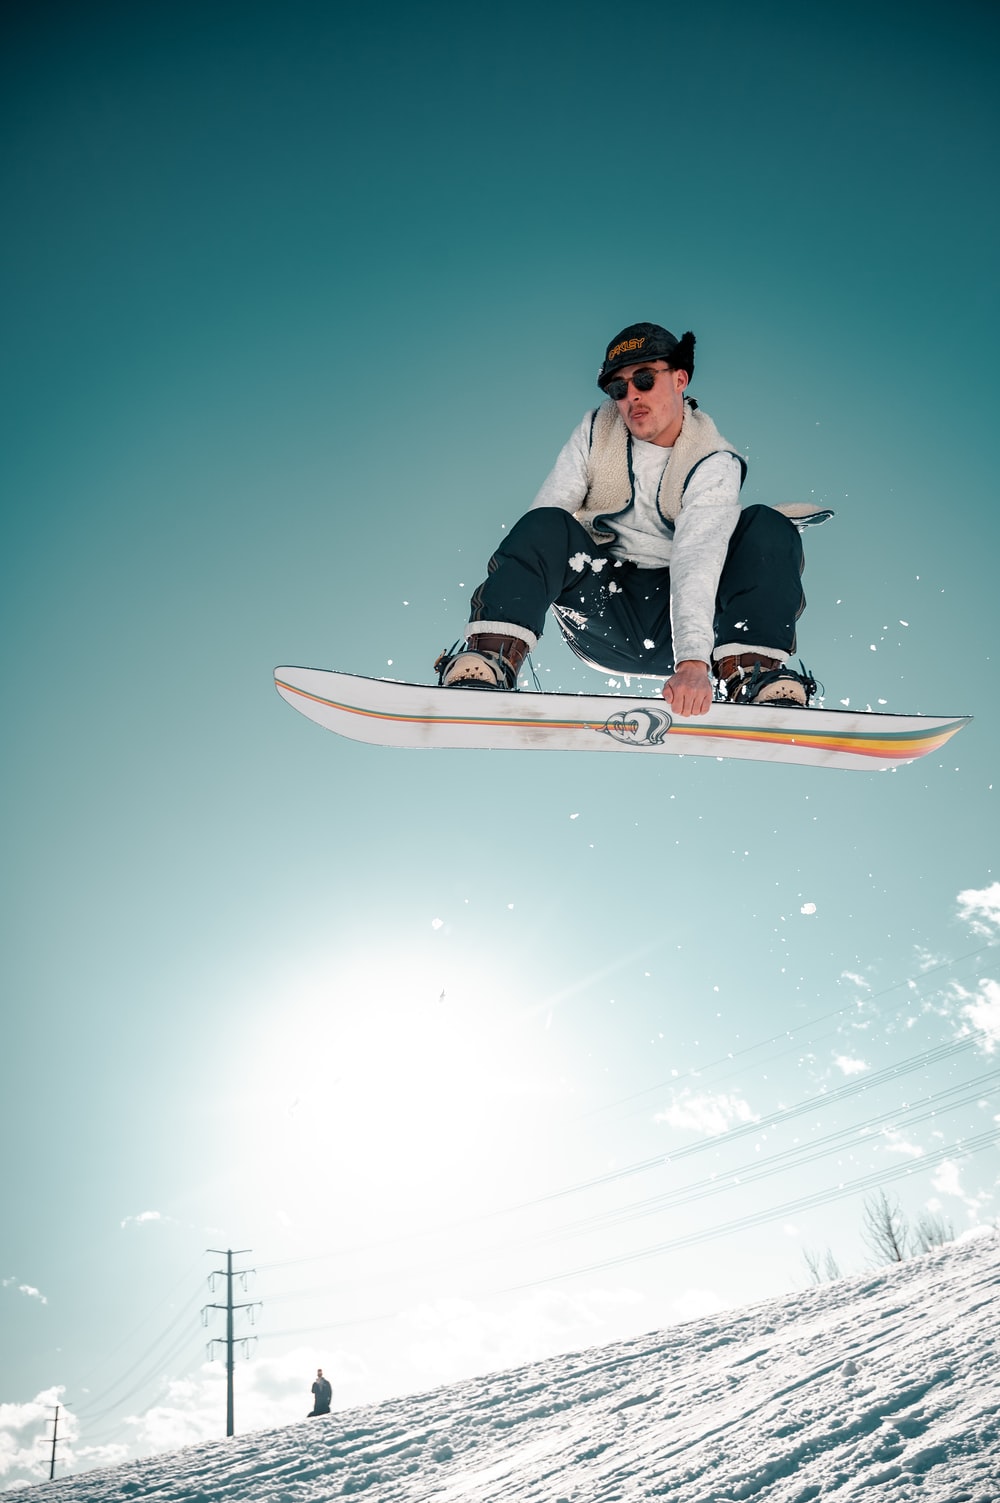 Snowboarding Aesthetic Wallpapers - Wallpaper Cave